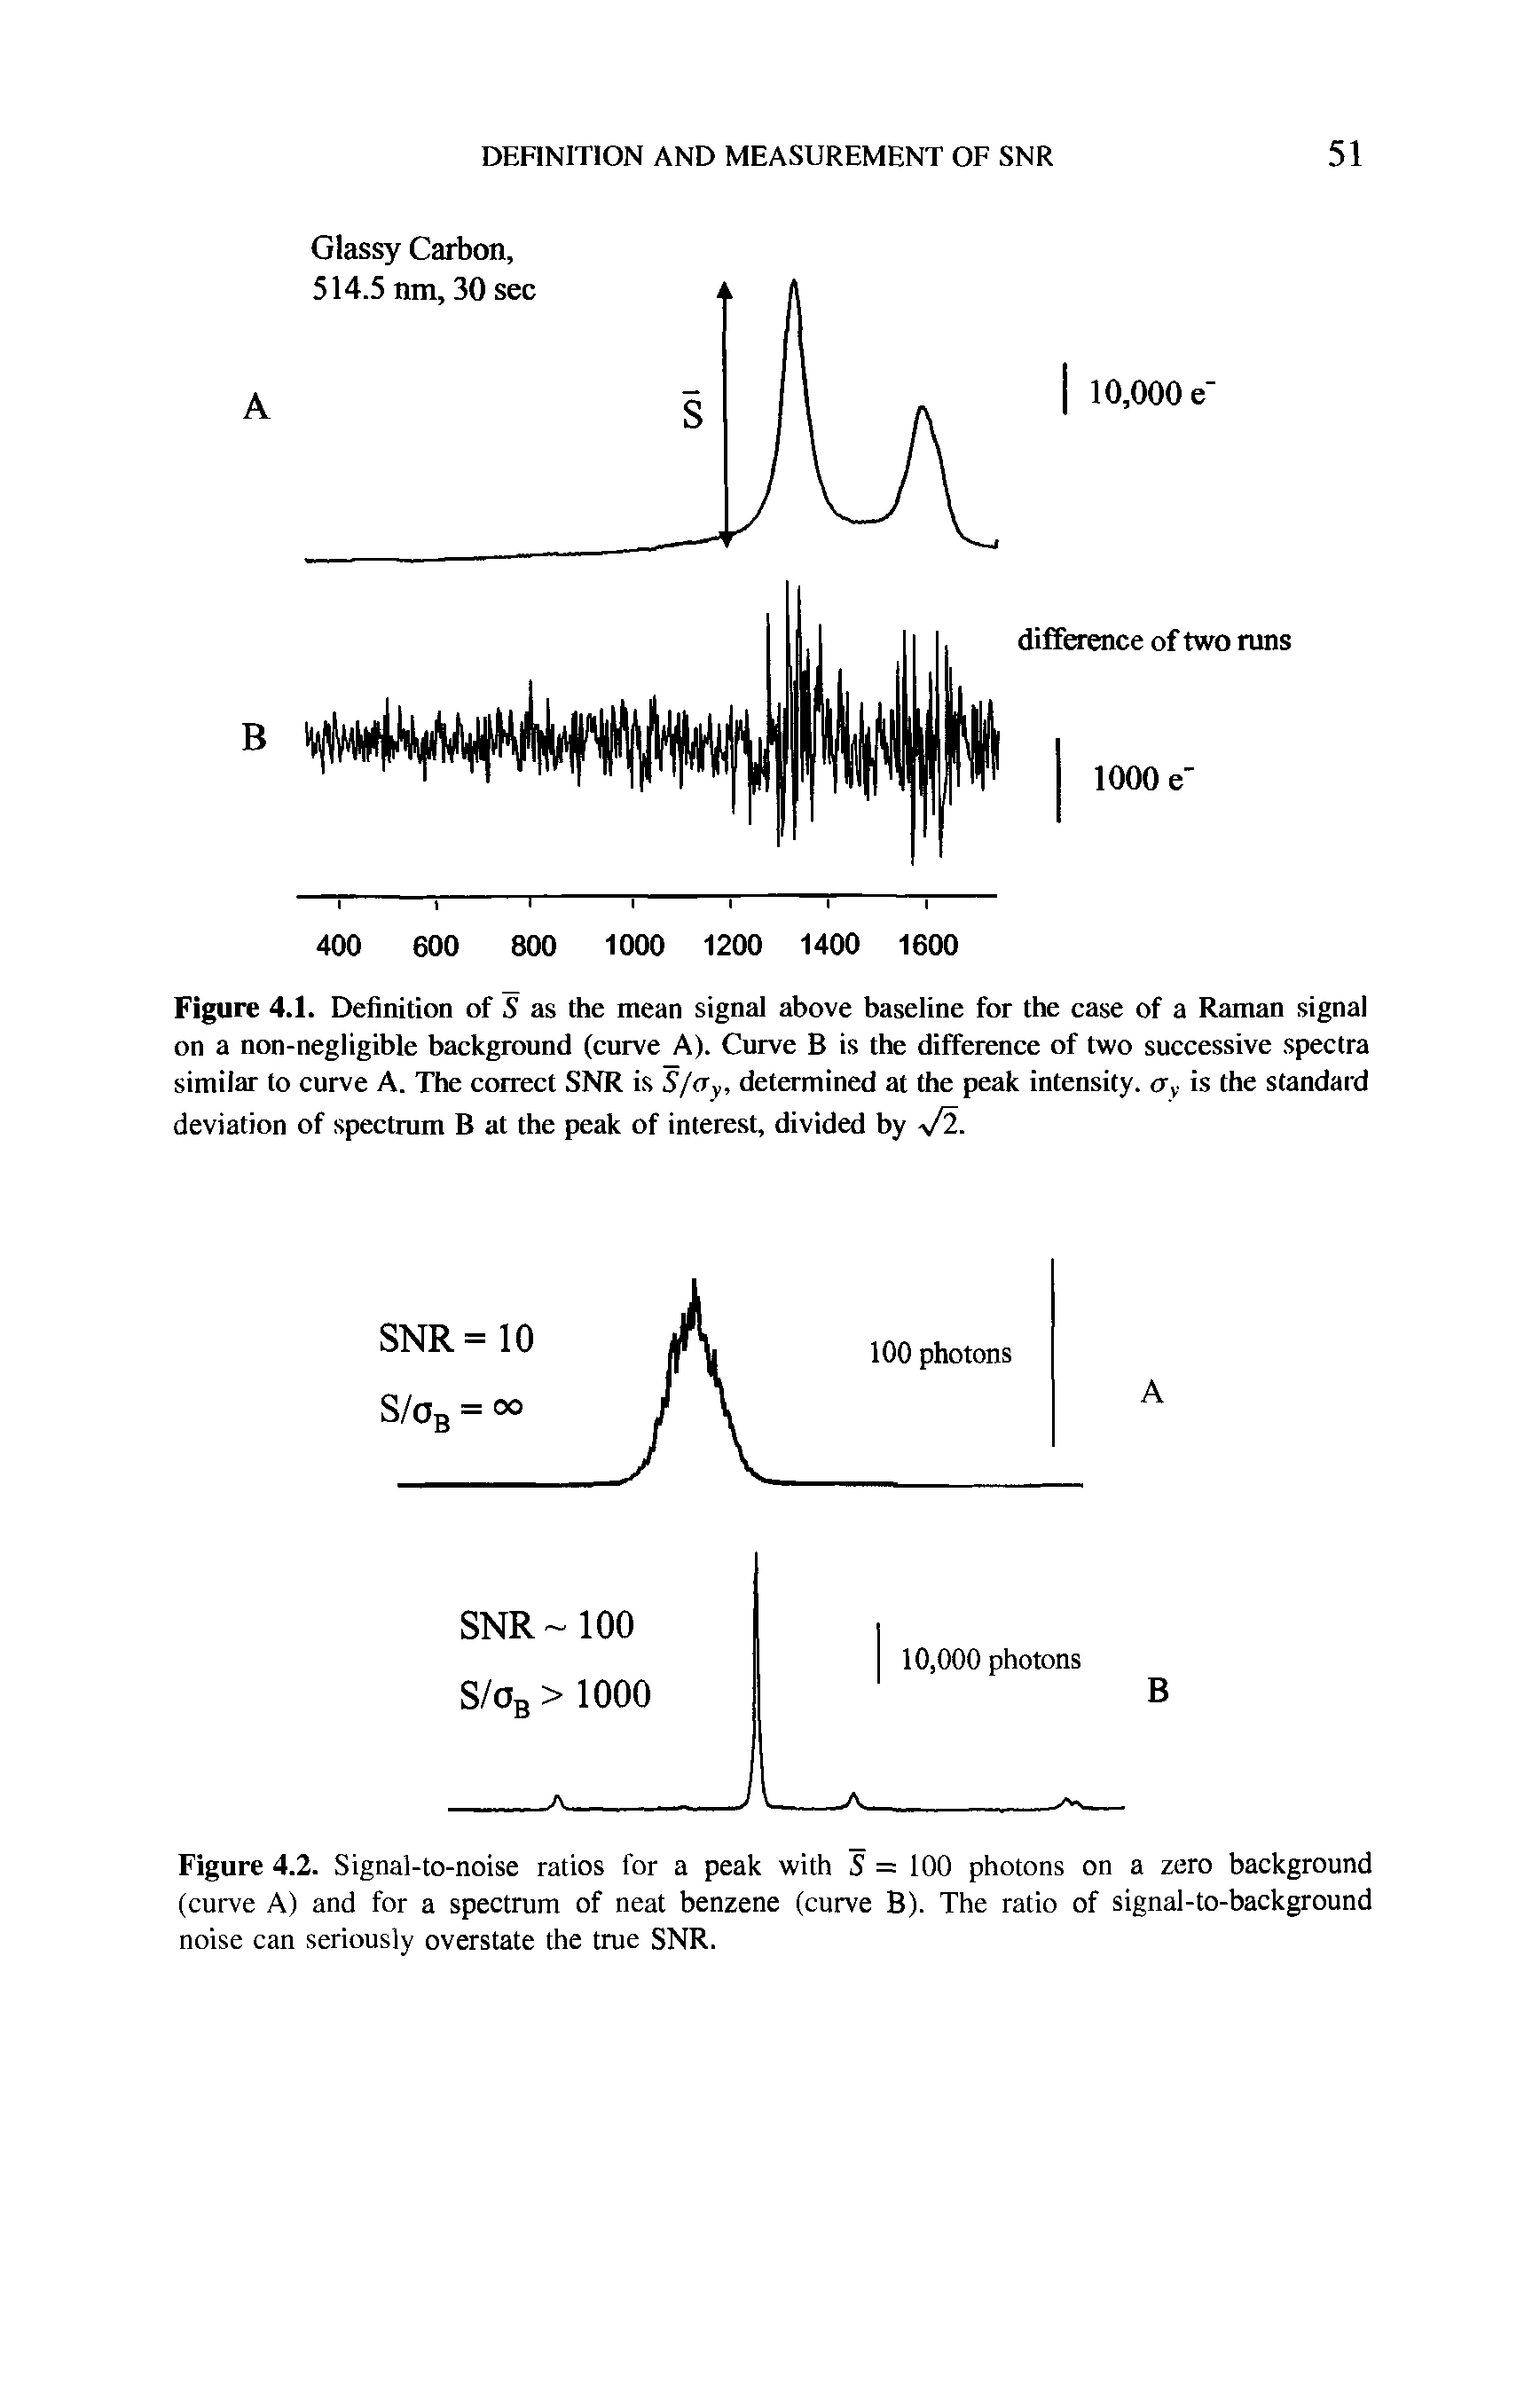 Figure 4.2. Signal-to-noise ratios for a peak with S = 100 photons on a zero background (curve A) and for a spectrum of neat benzene (curve B). The ratio of signal-to-background noise can seriously overstate the true SNR.